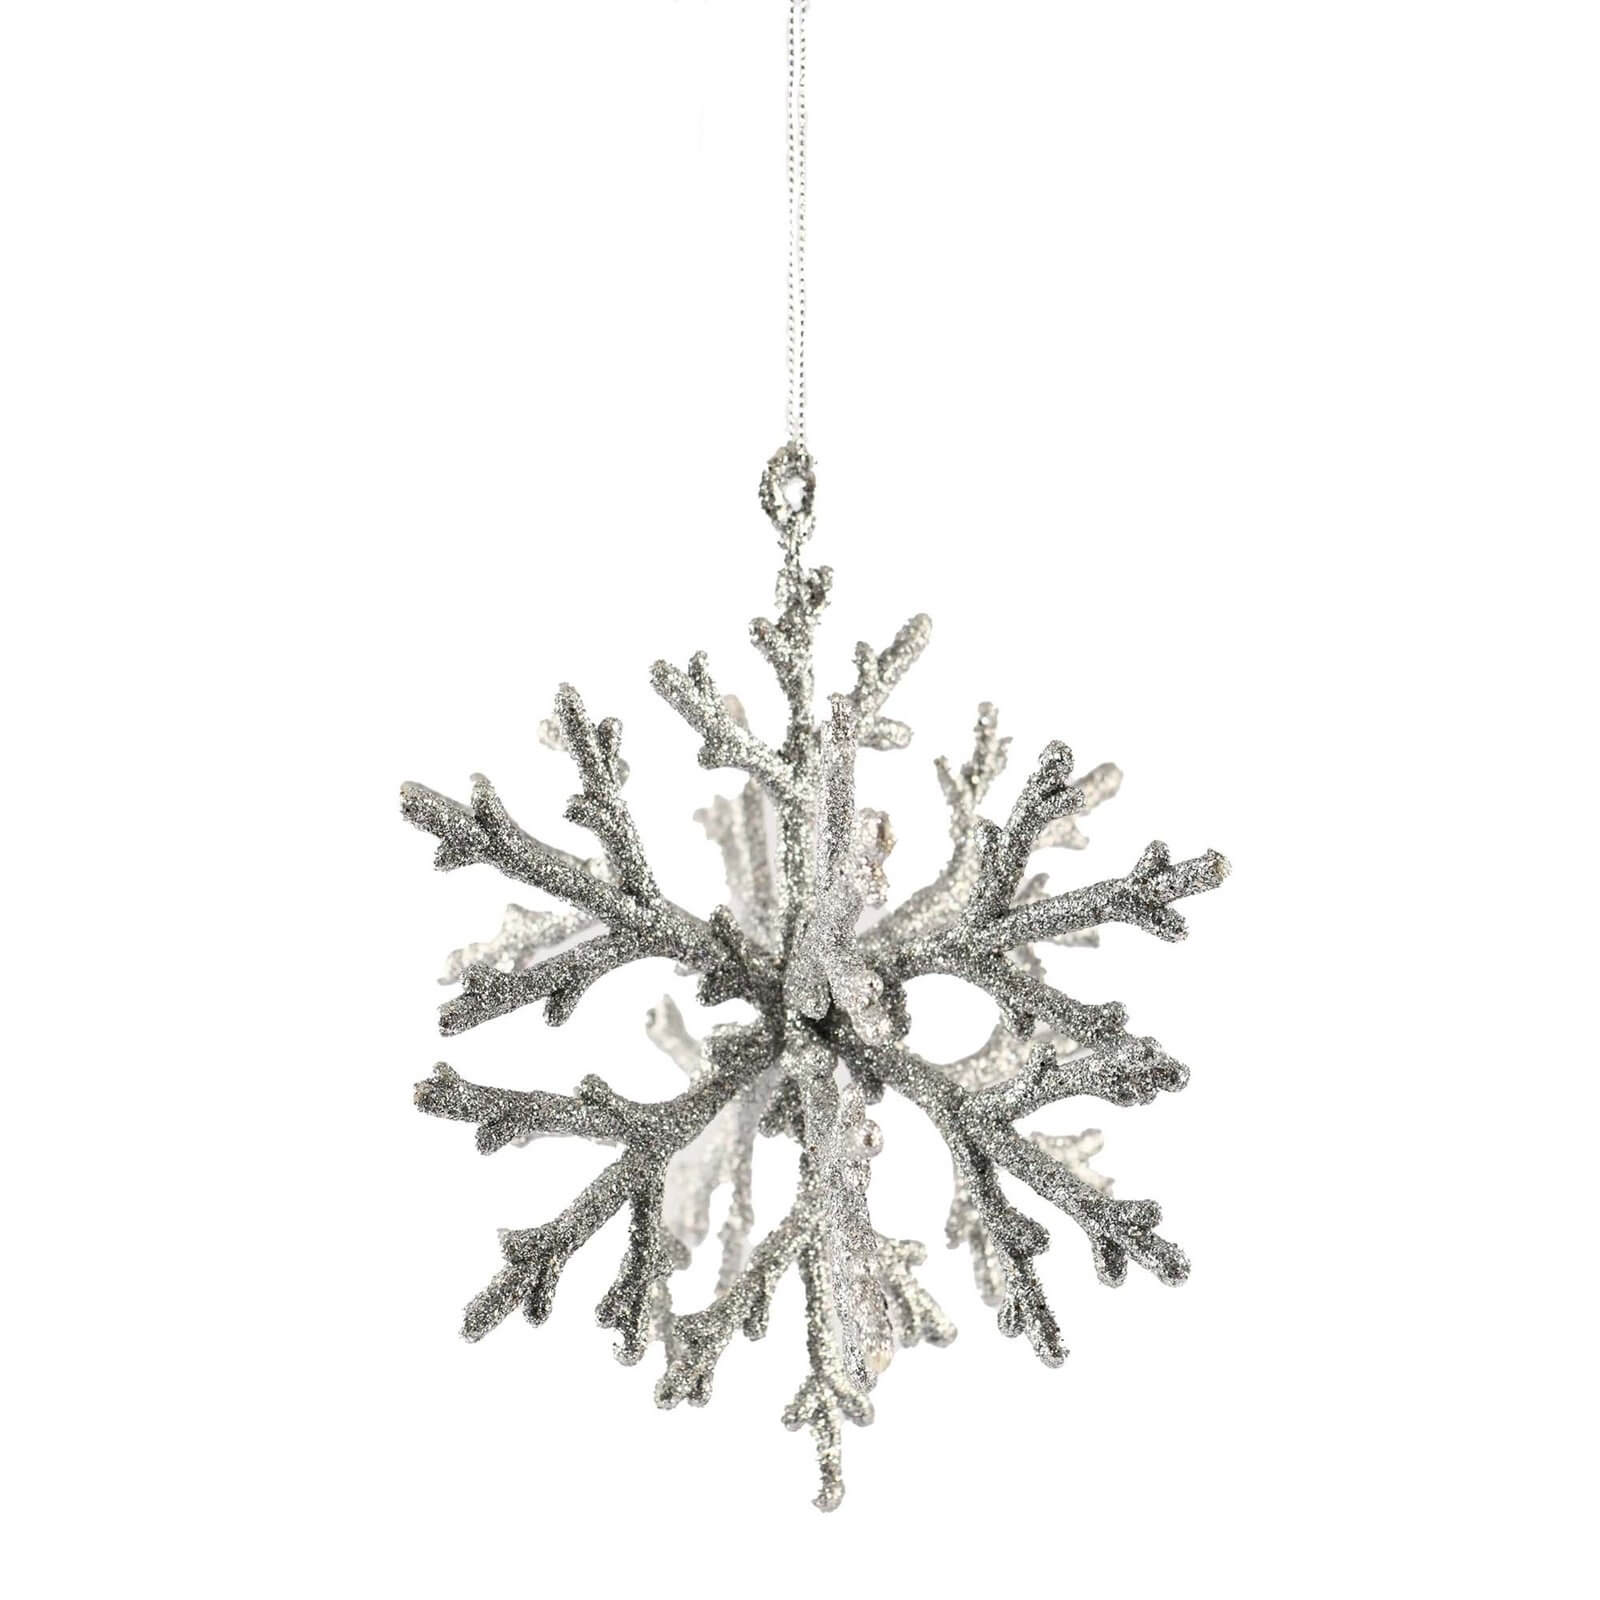 Silver Glitter 3D Snowflake Hanging Tree Decoration